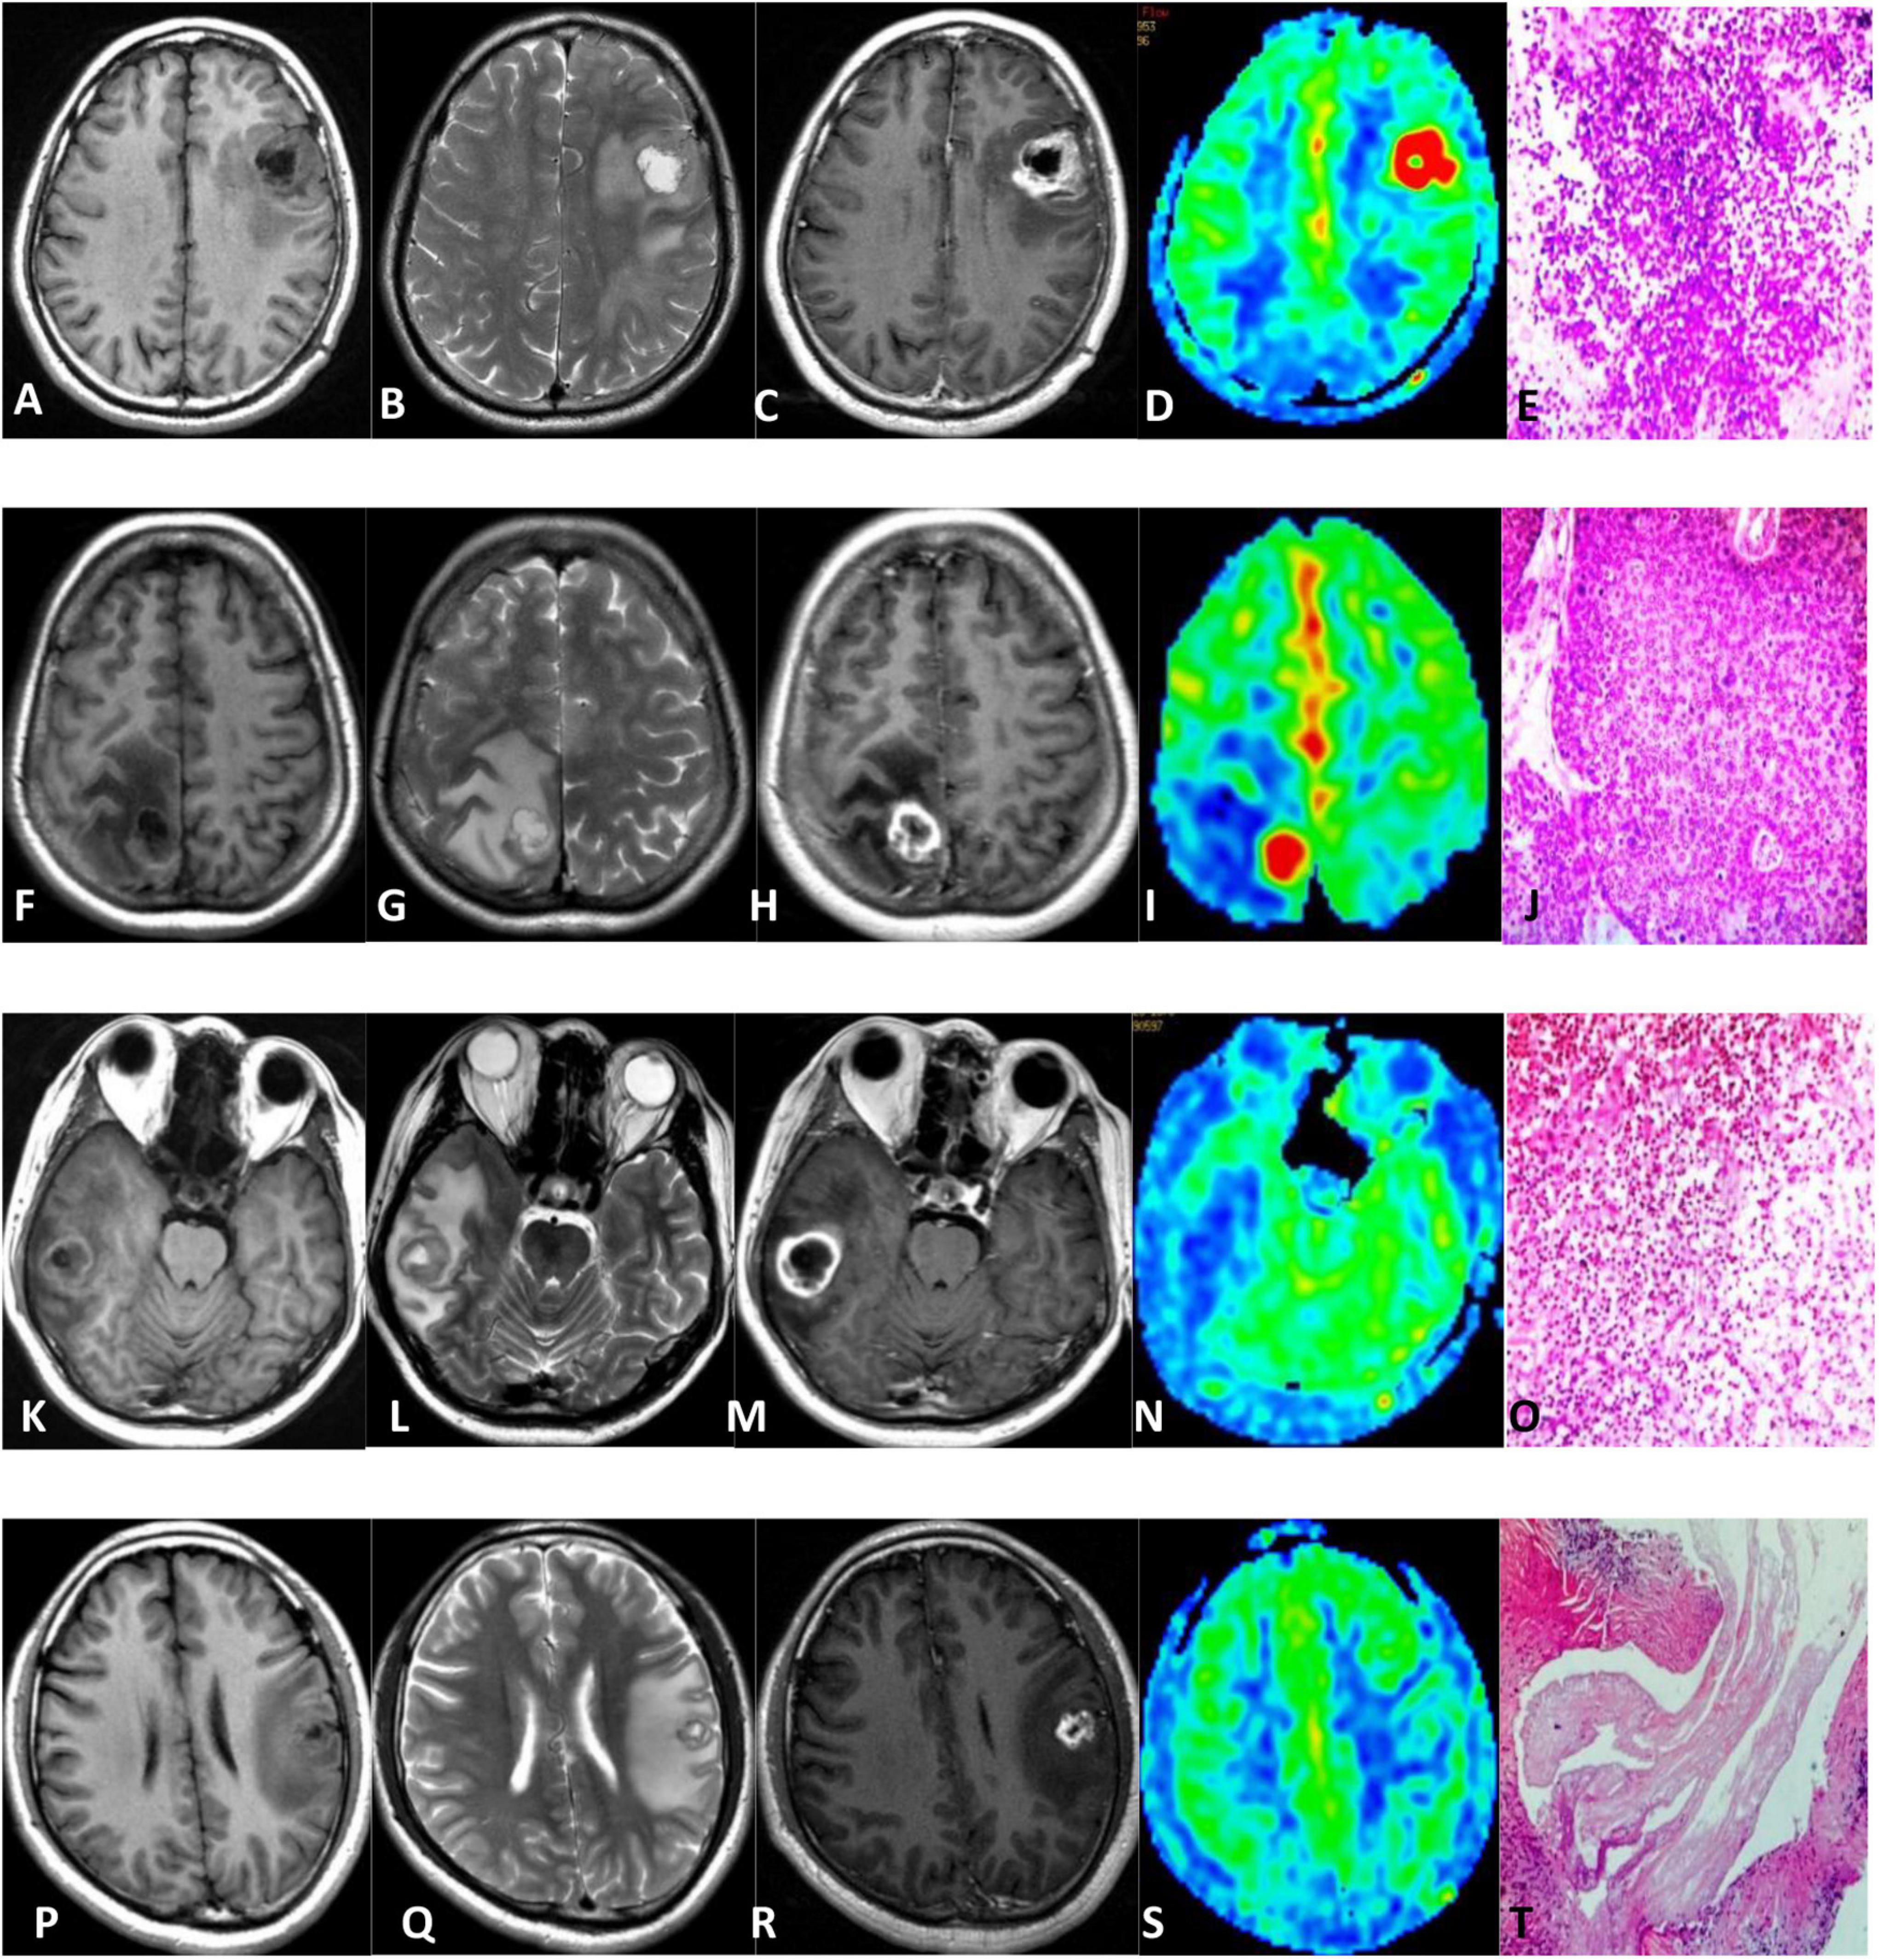 The test database of MR brain images and corresponding results for the